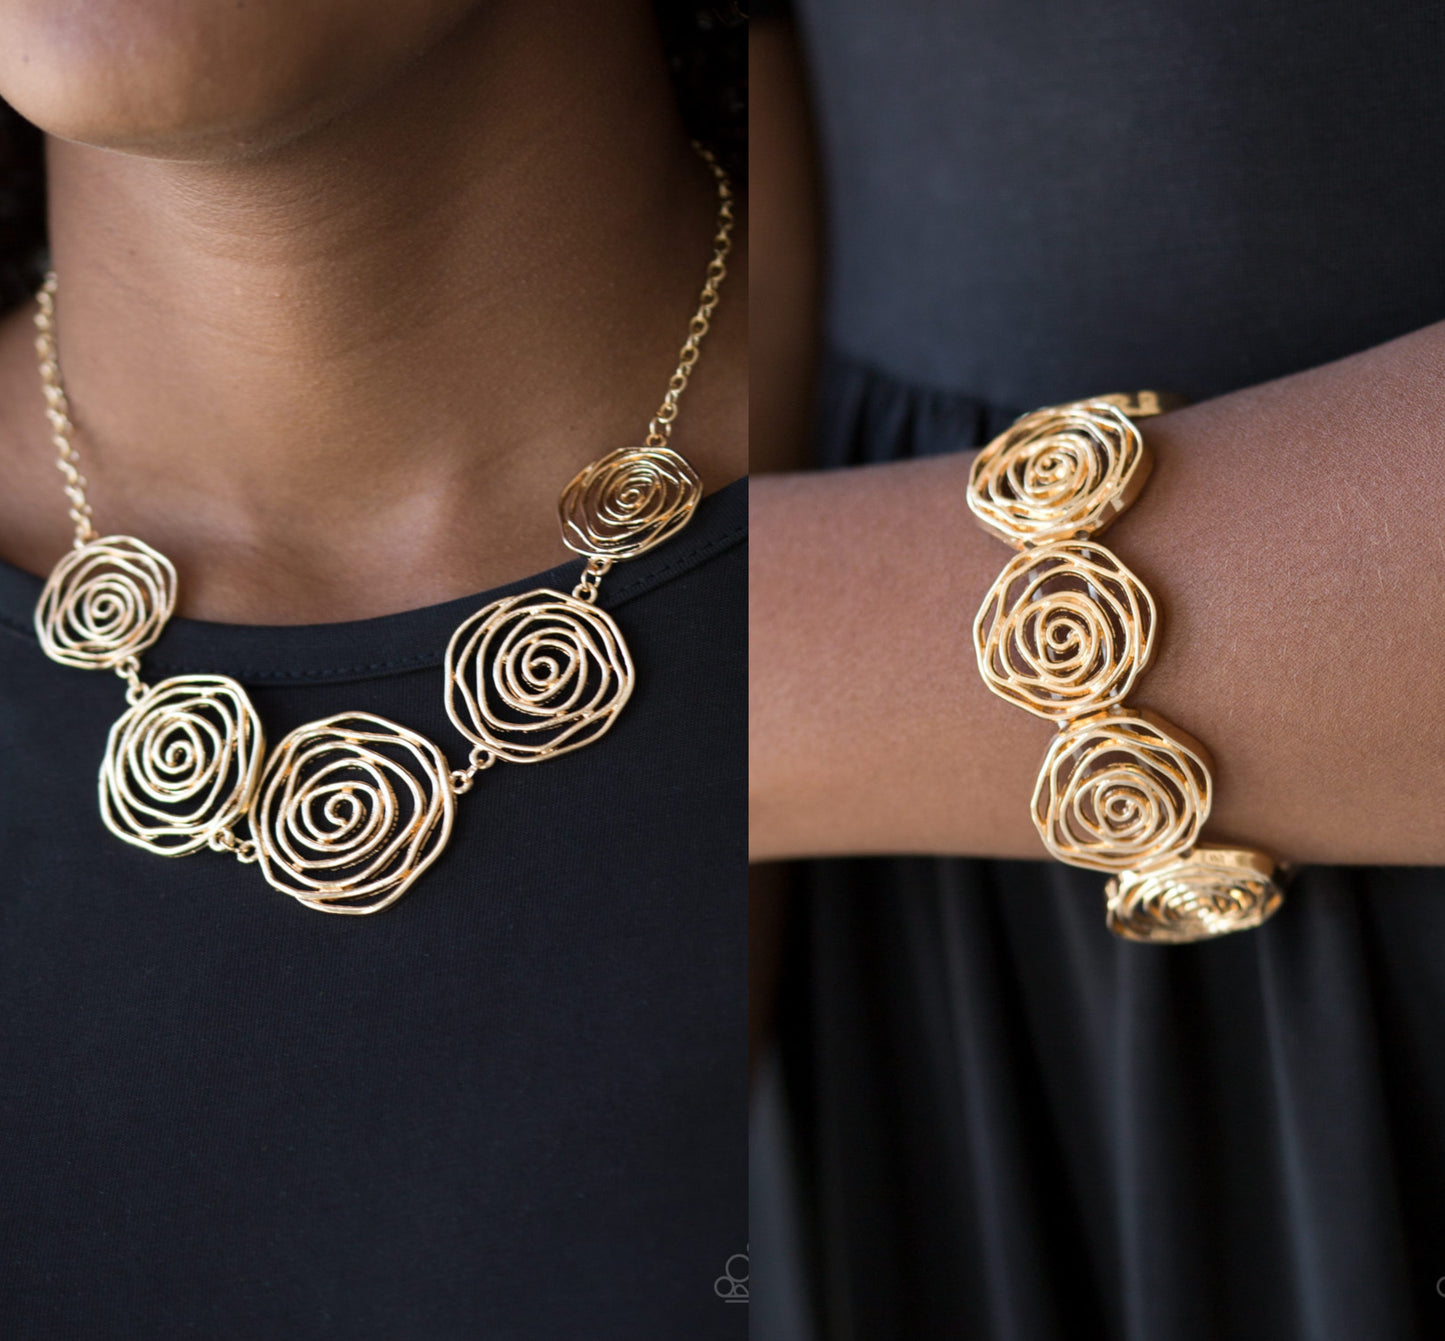 Rosy Rosette - Gold necklace w/ matching bracelet